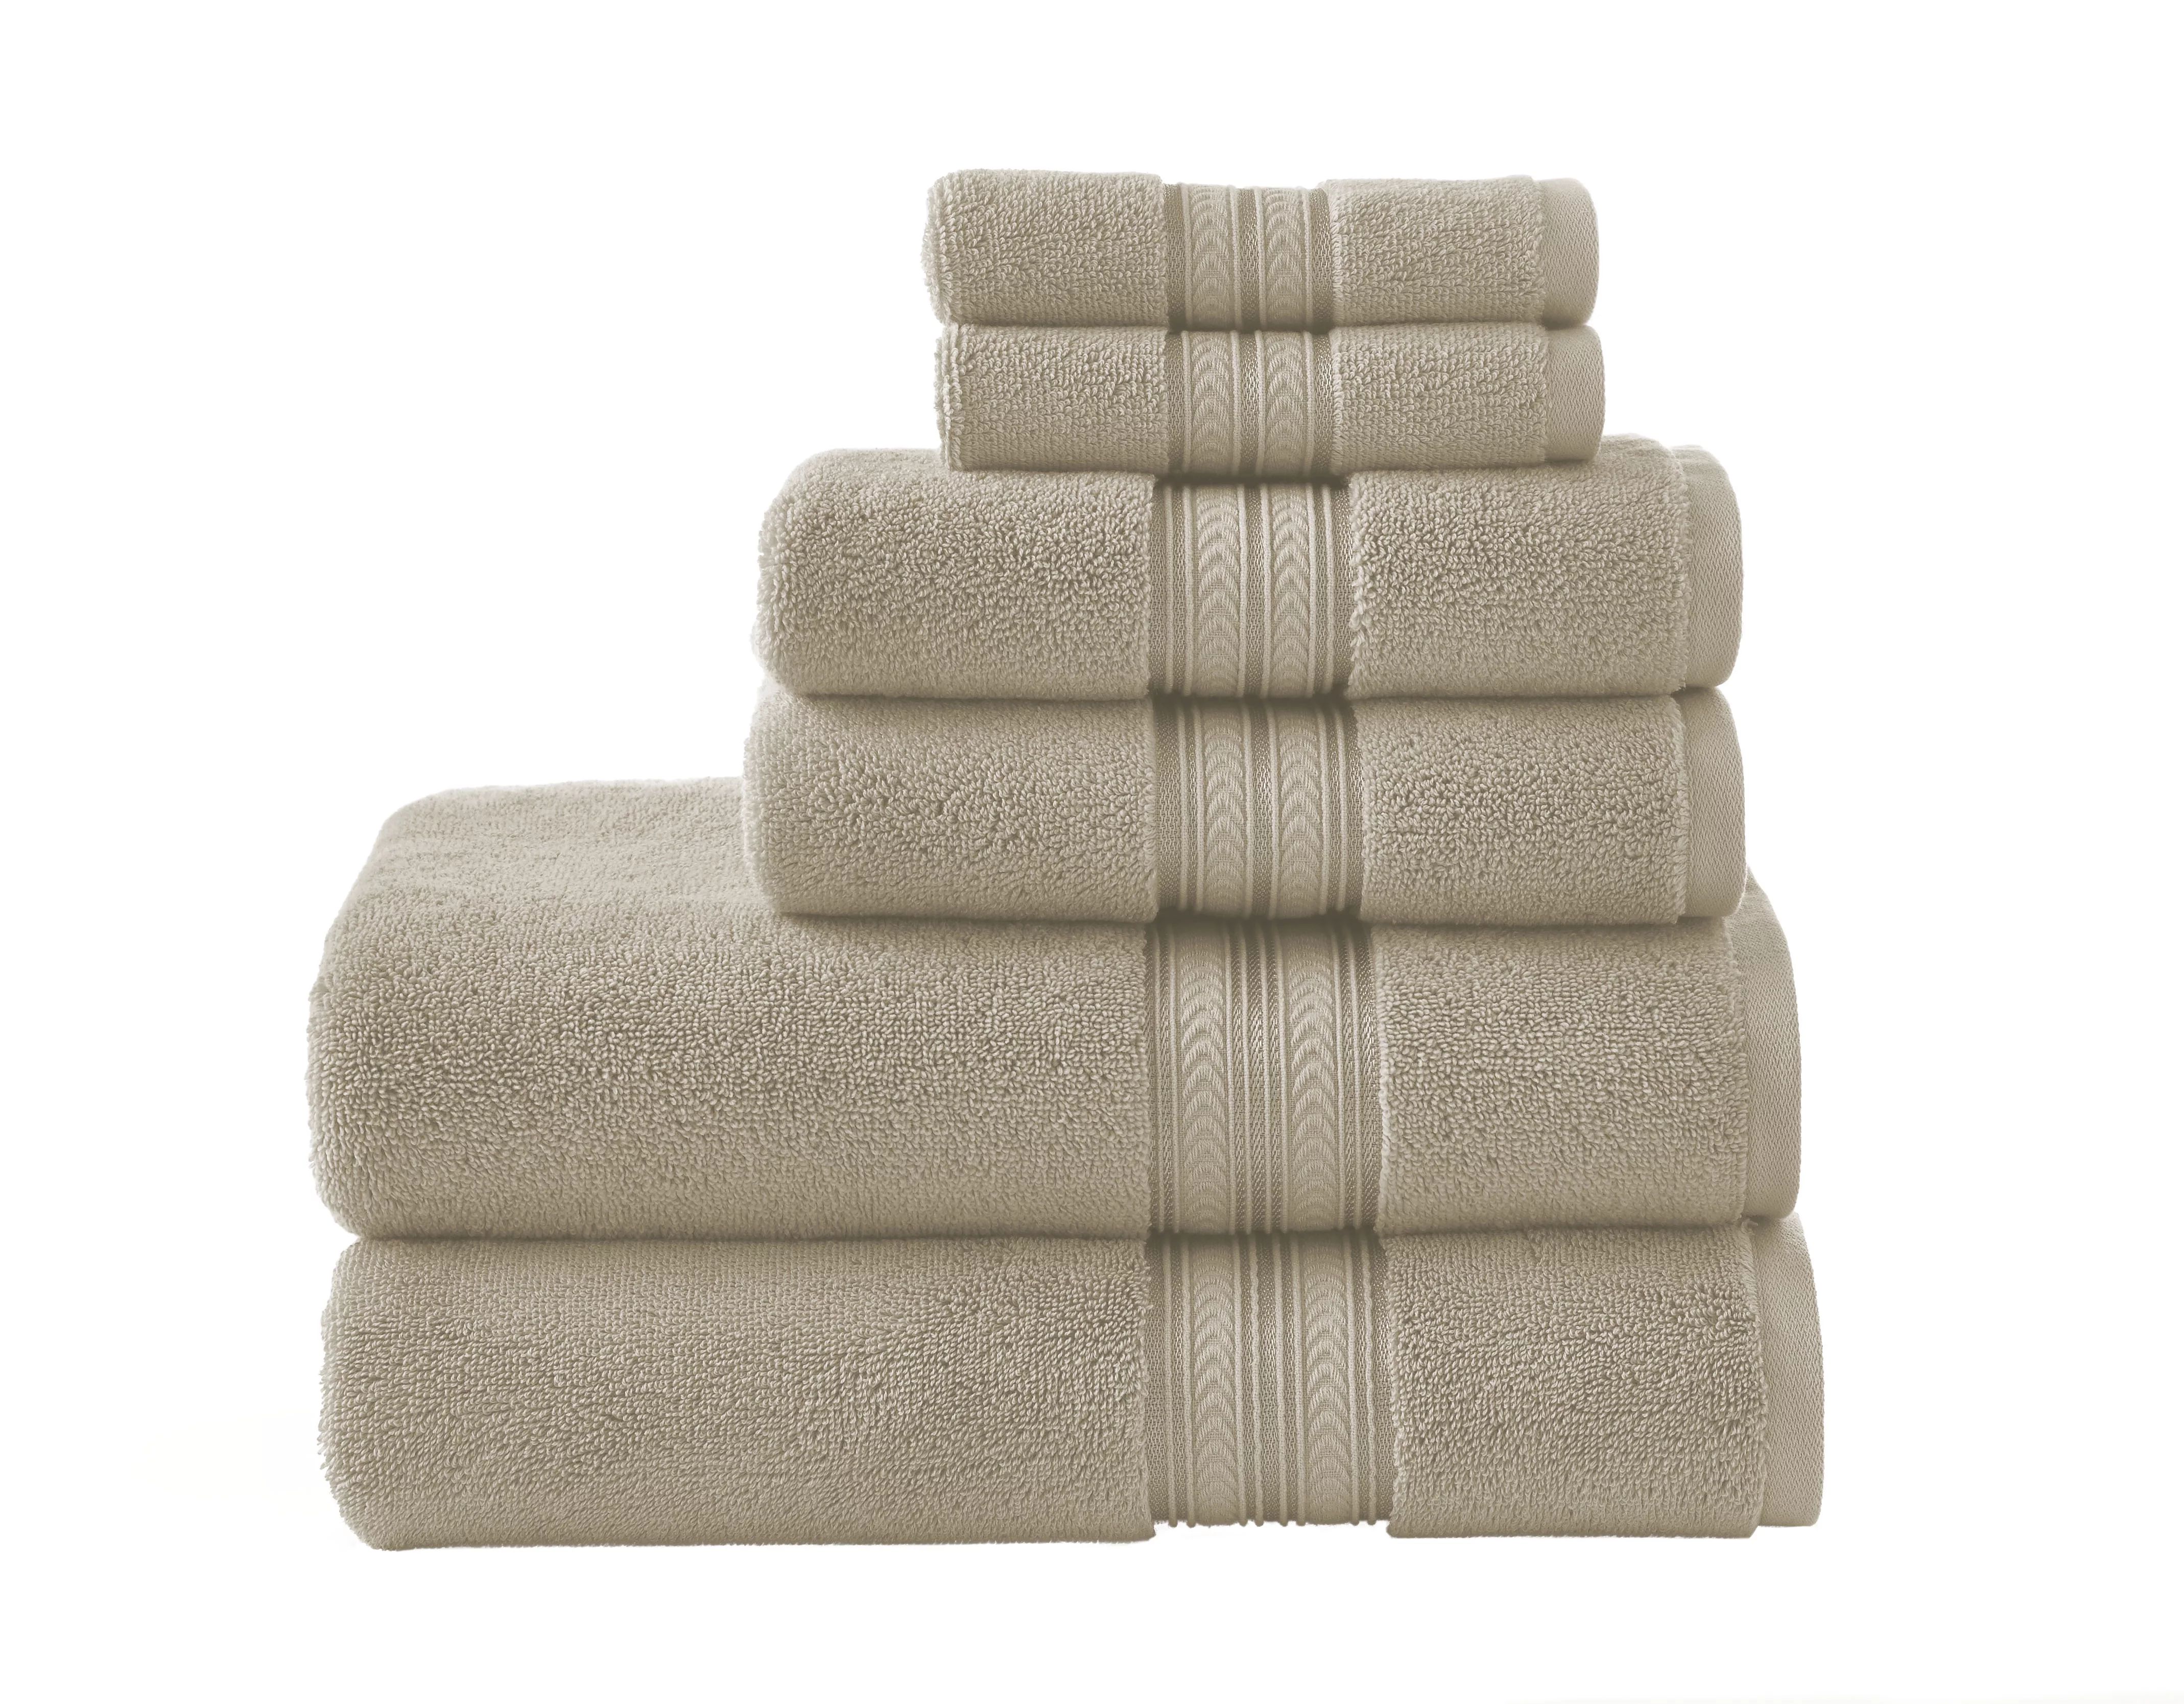 Better Homes and Gardens Thick and Plush 6 Piece Bath Towel Set, Papyrus Beige | Walmart (US)